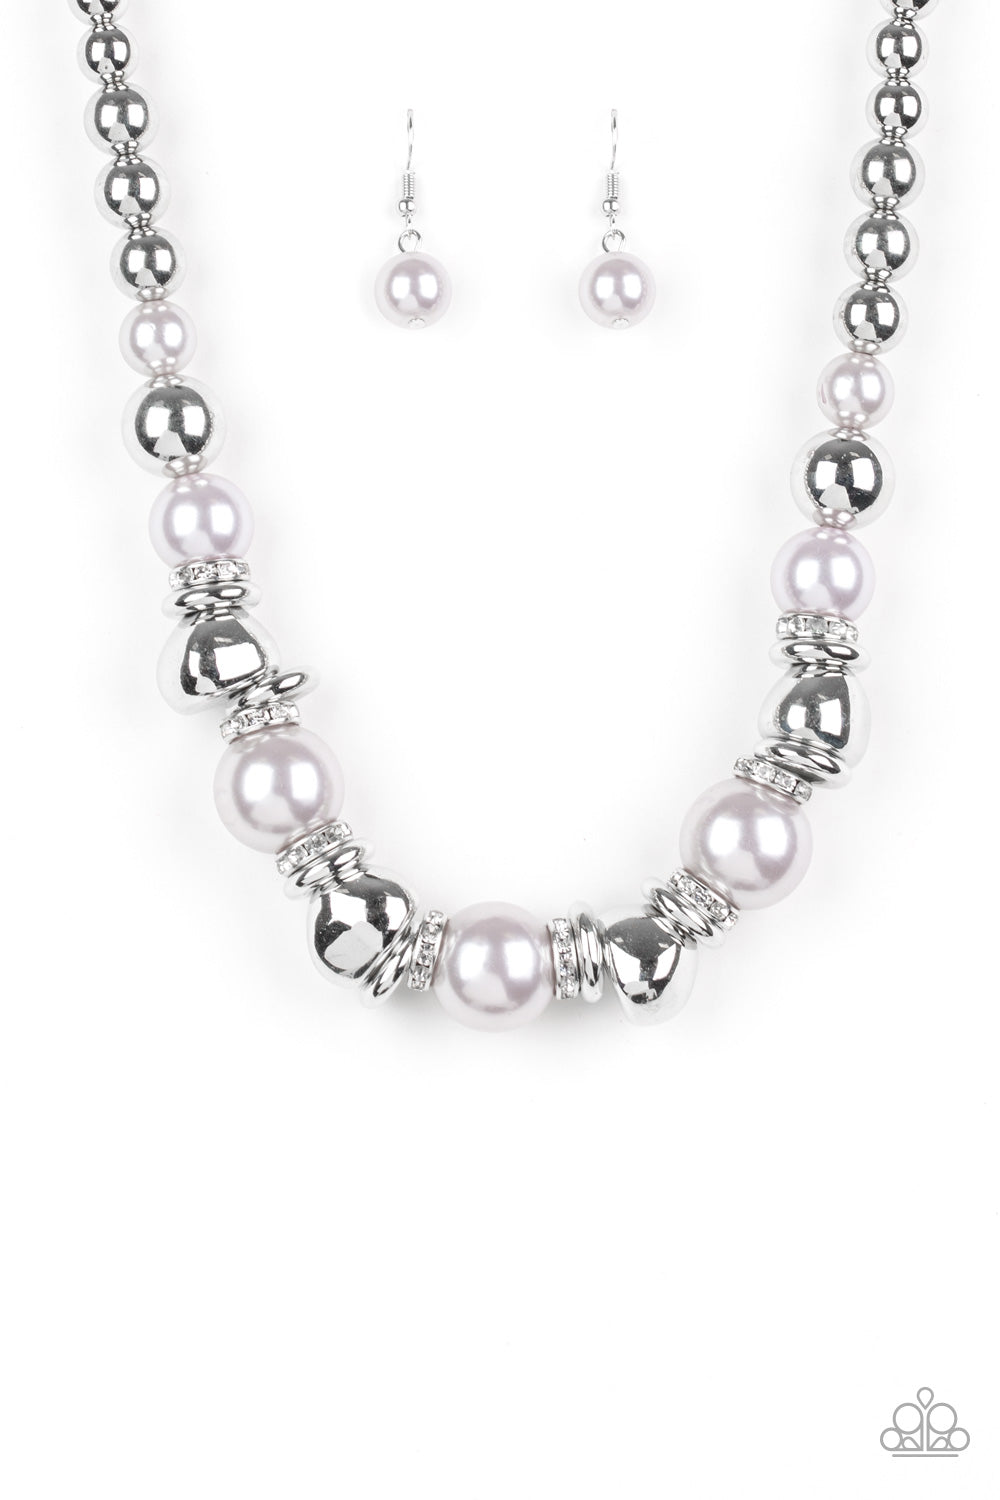 Paparazzi Hollywood HAUTE Spot - Silver Necklace - A Finishing Touch 